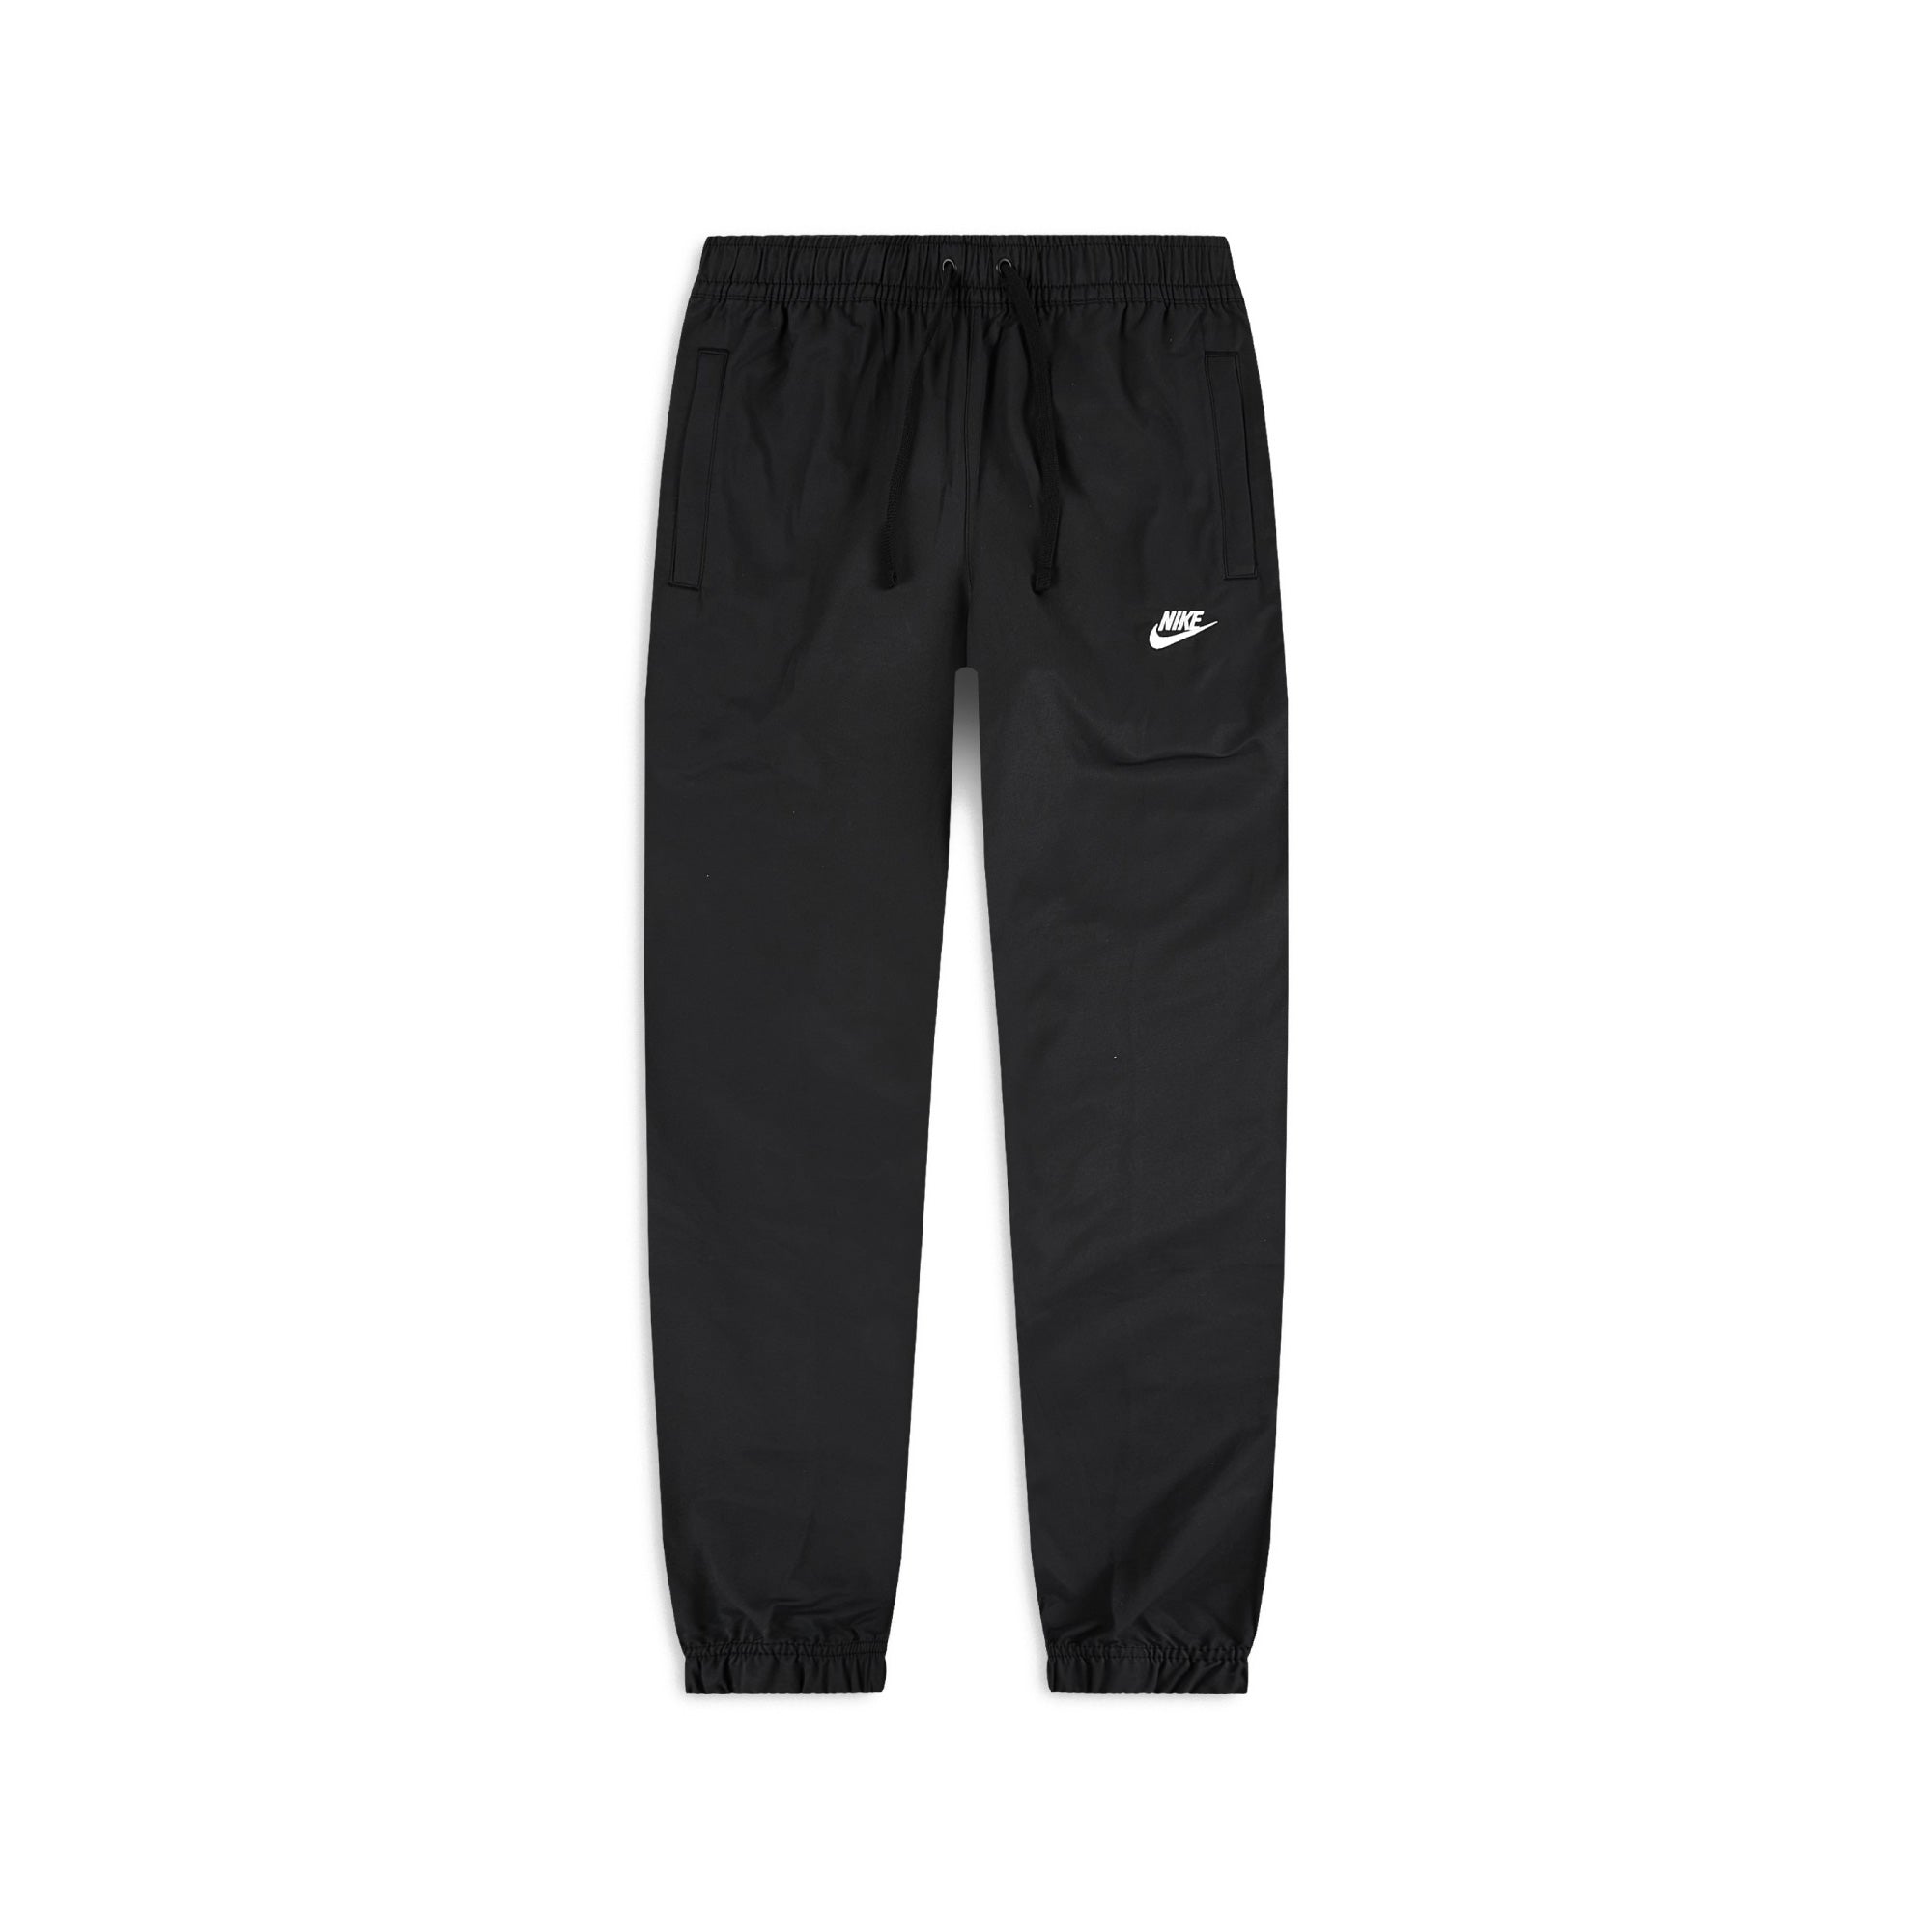 NSW Unlined Cuff Pant Black